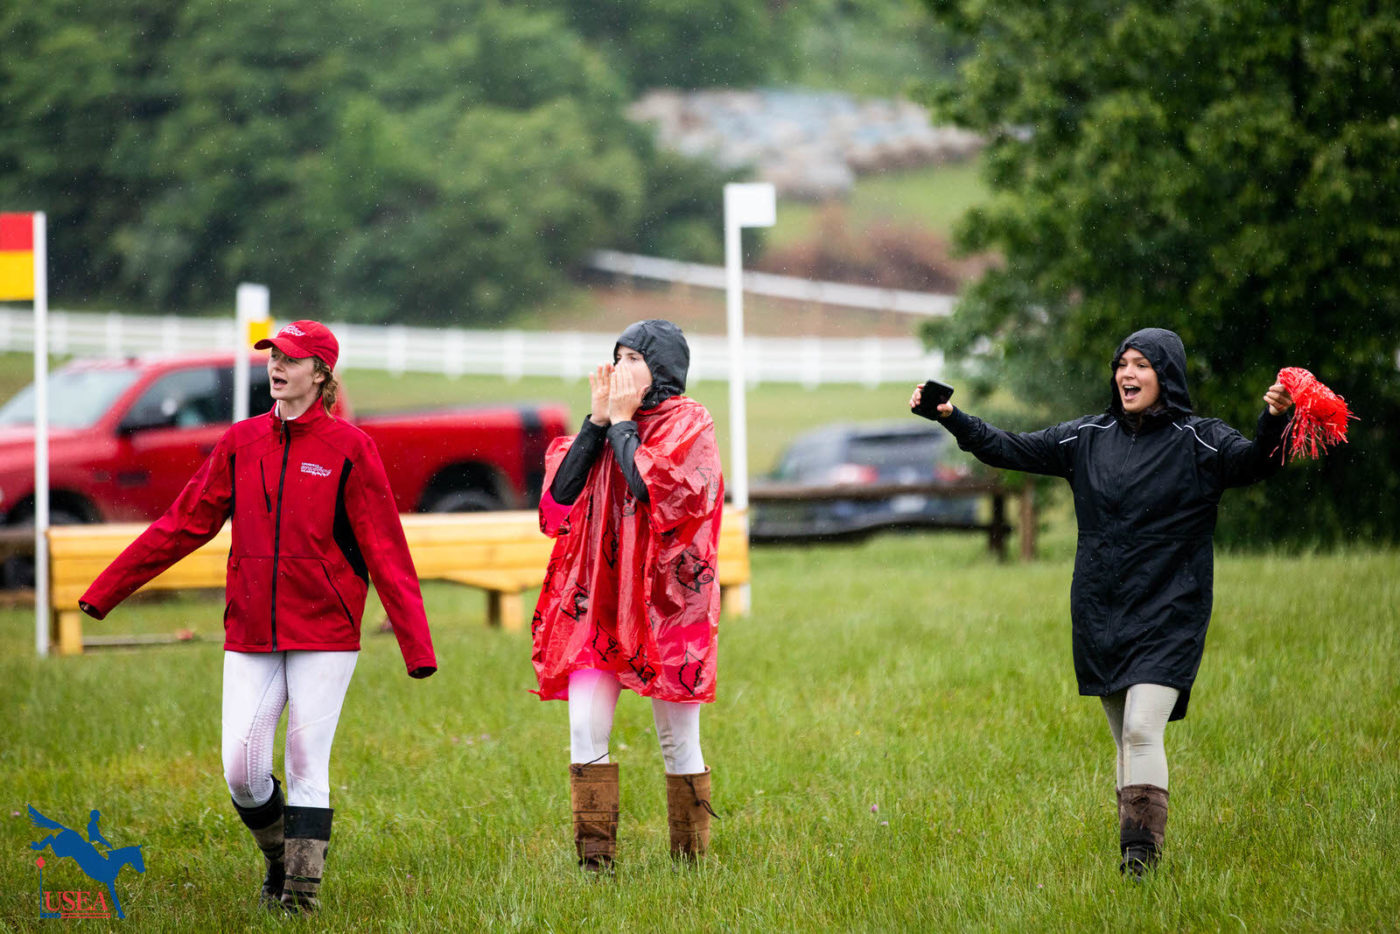 Louisville cheering loud for their riders out on cross-country. USEA/Kim Beaudoin photo